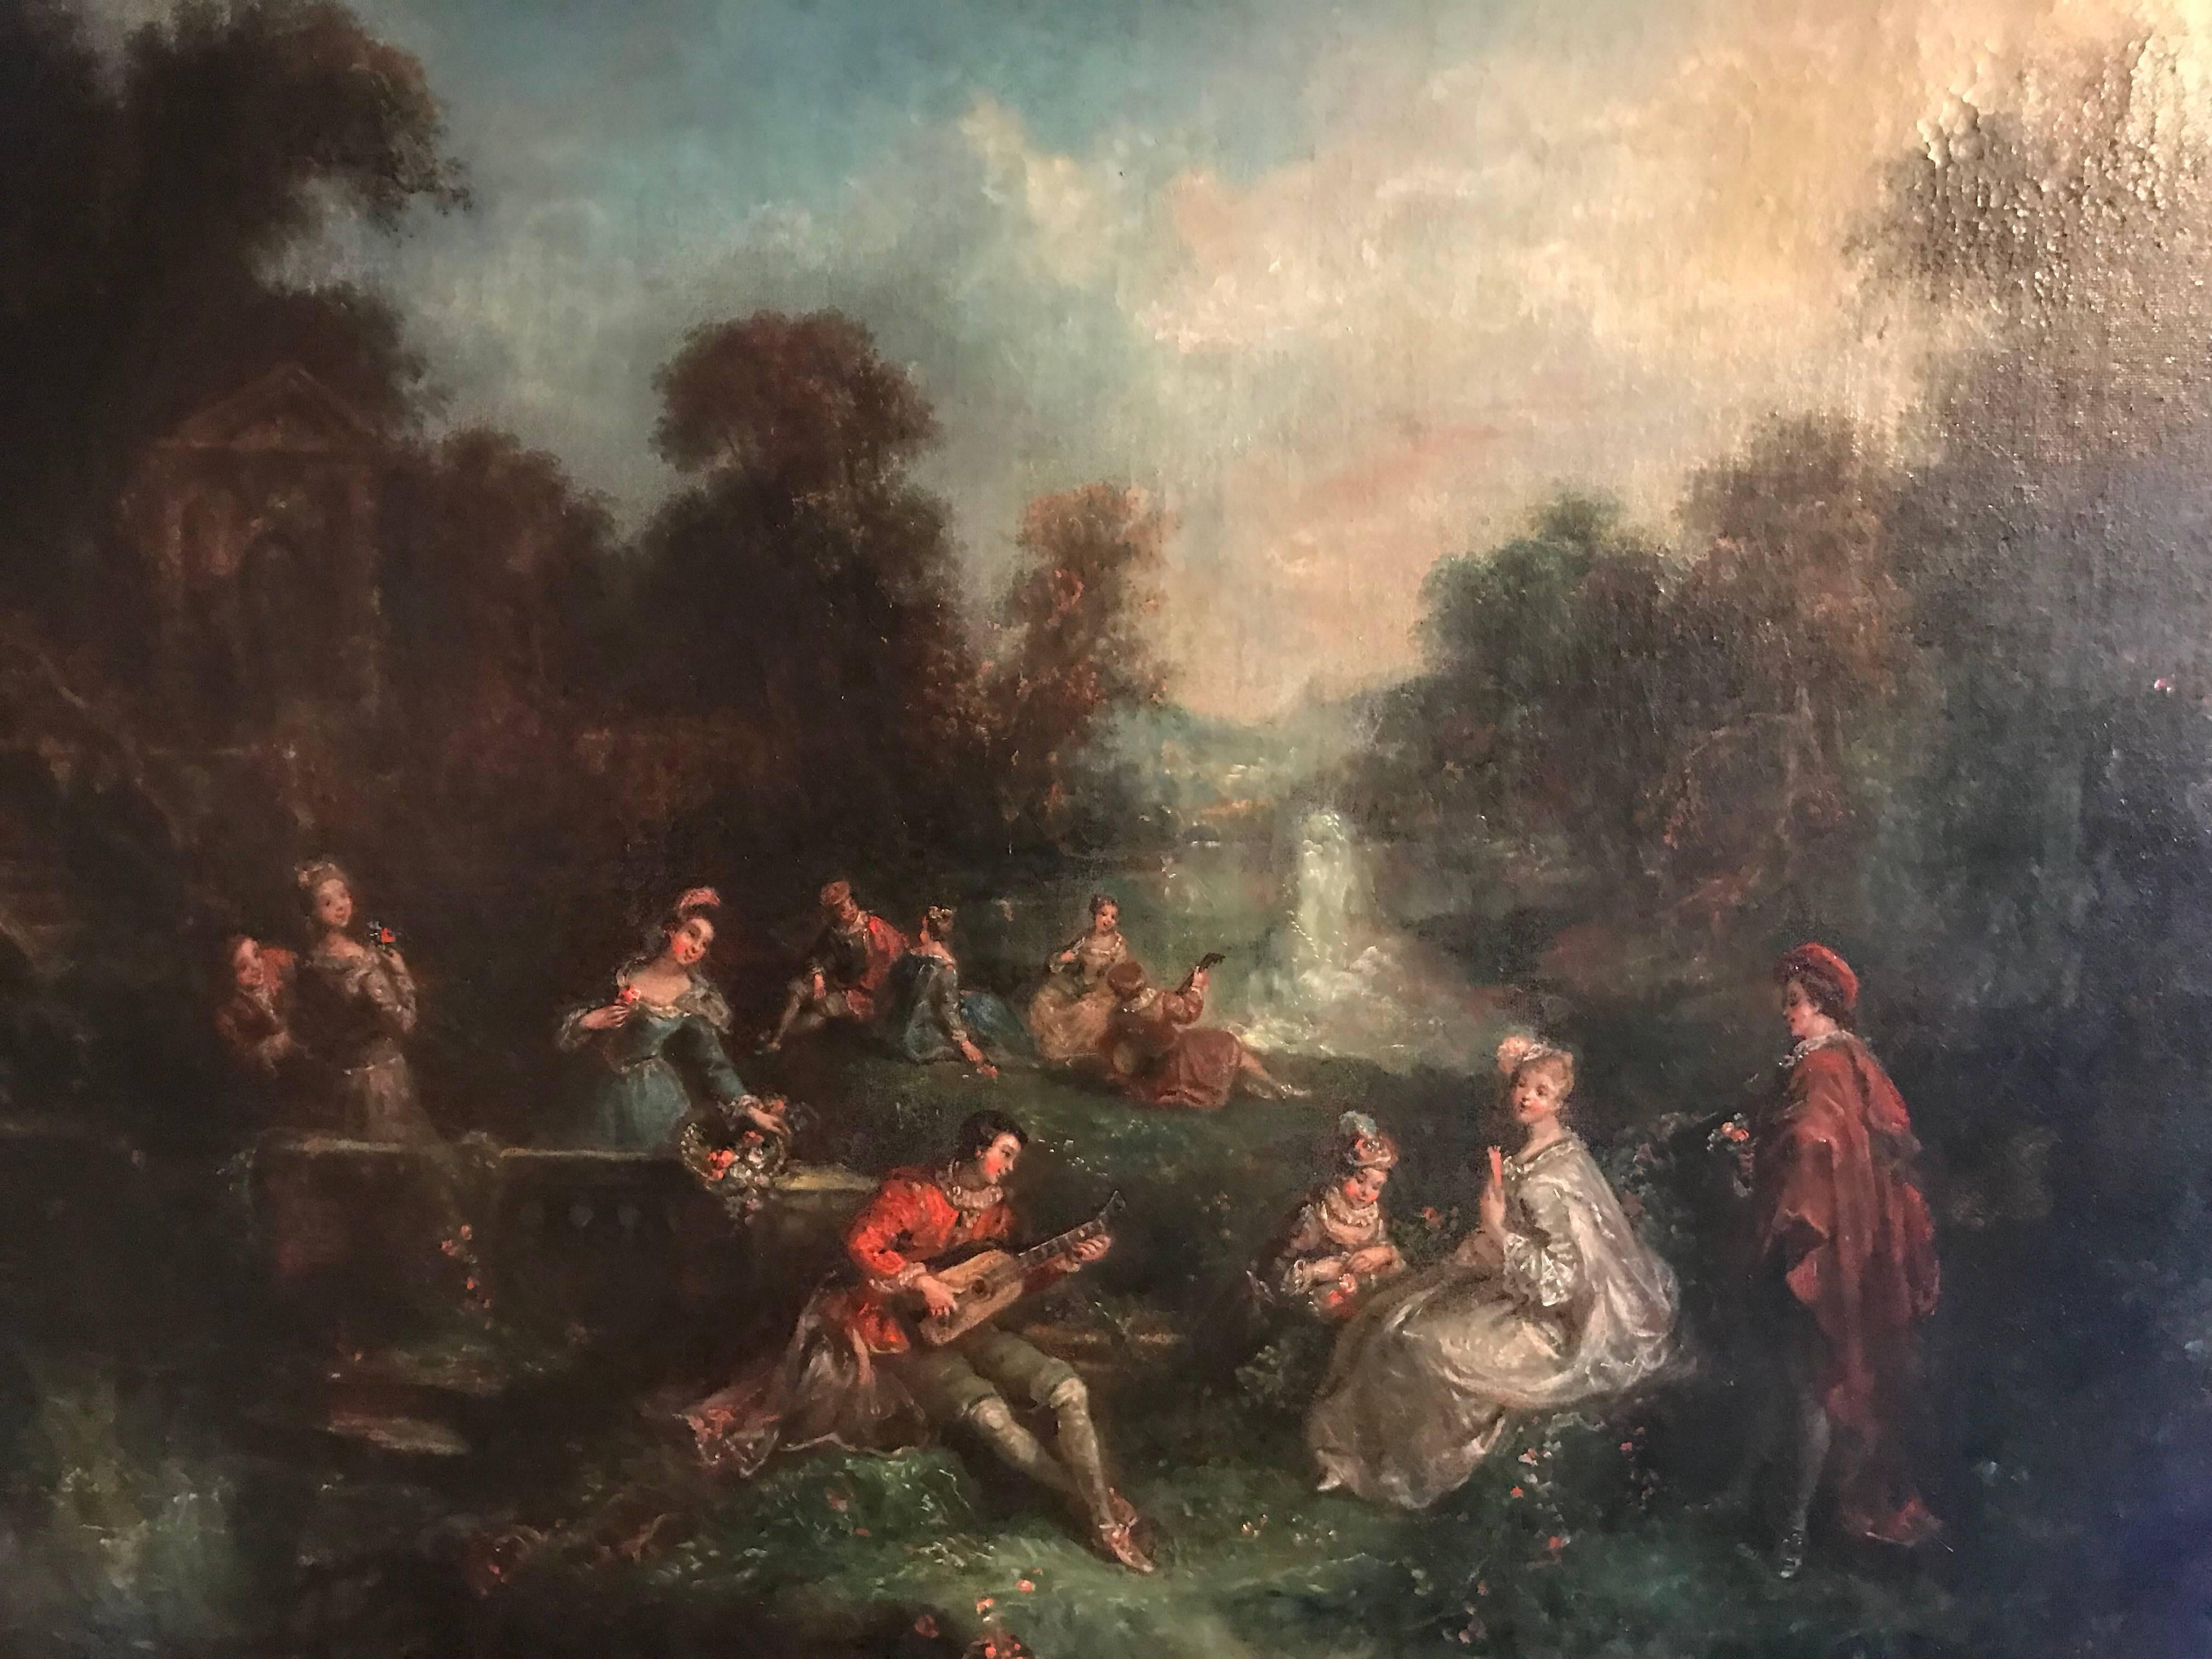 Unknown Landscape Painting - Huge 18th Century French Oil Painting - Fete Champetre Classical Figures